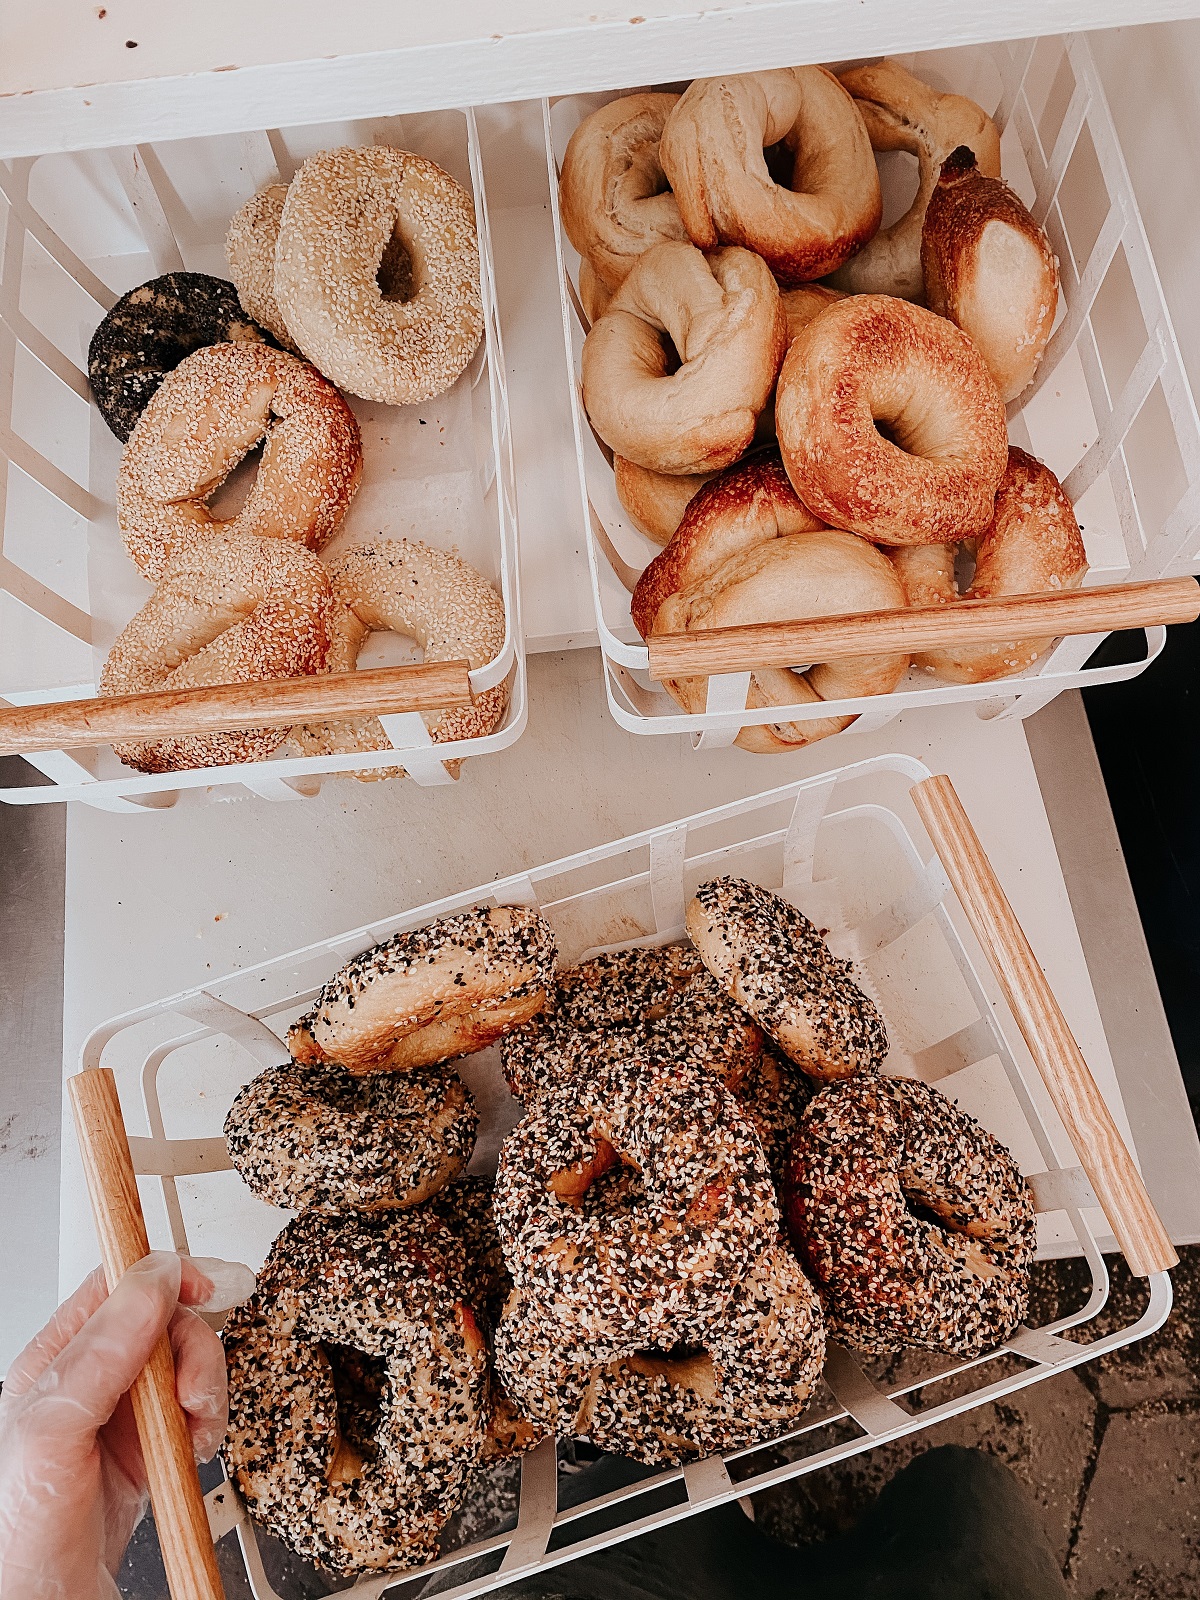 Baskets of different types of bagels